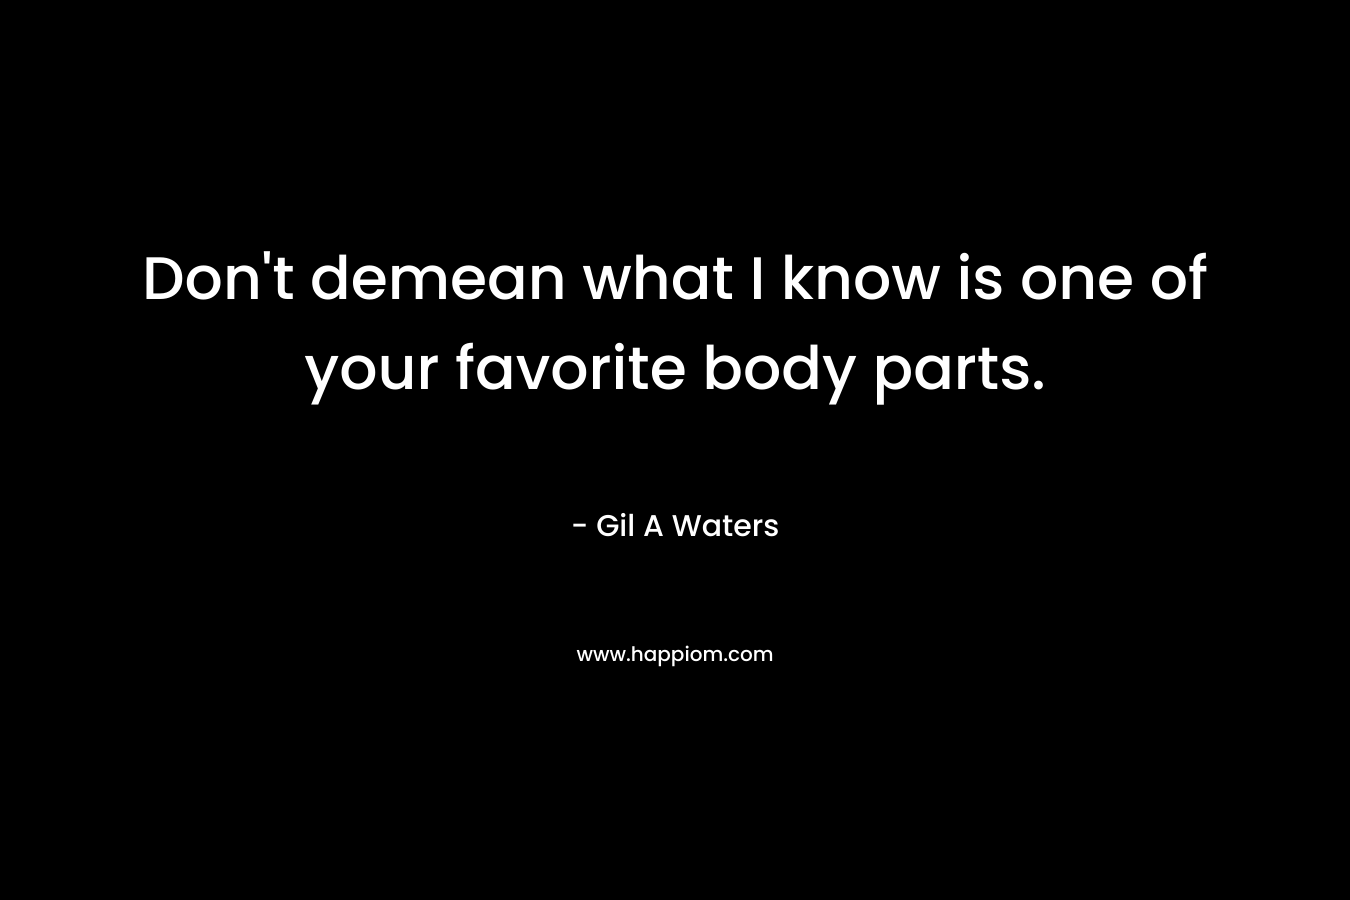 Don’t demean what I know is one of your favorite body parts. – Gil A Waters